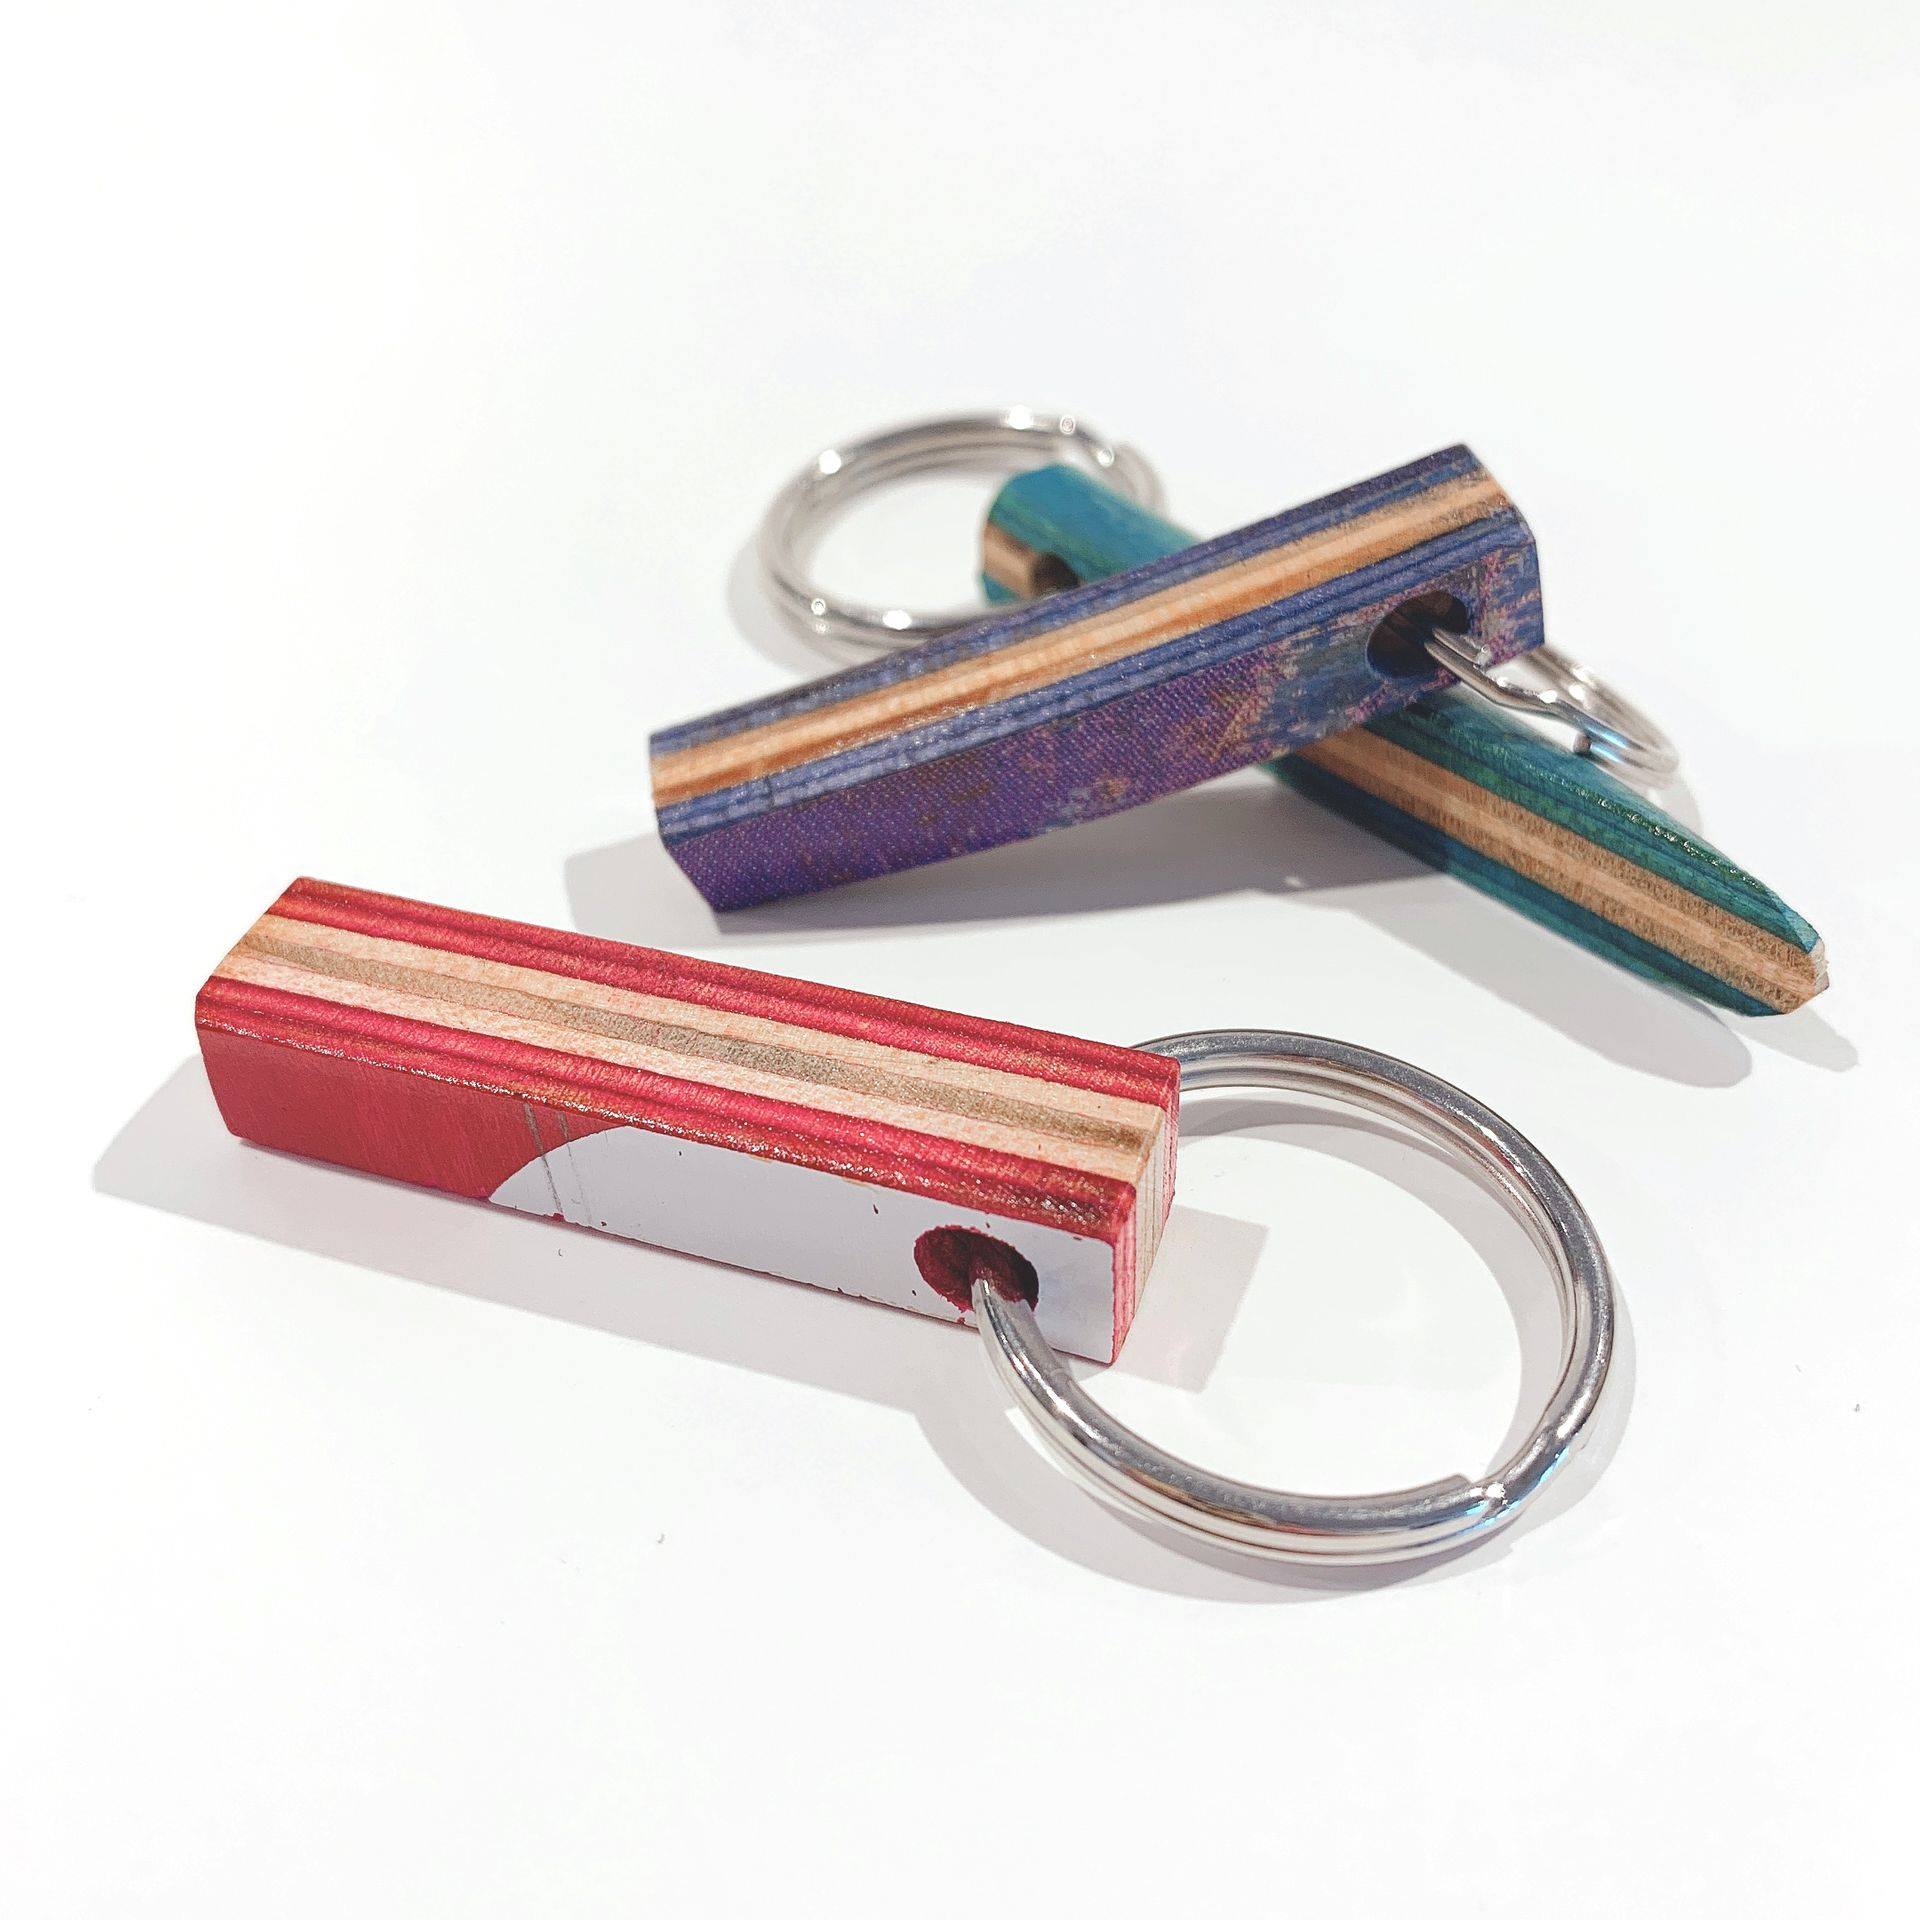 Craft-council-key-chains